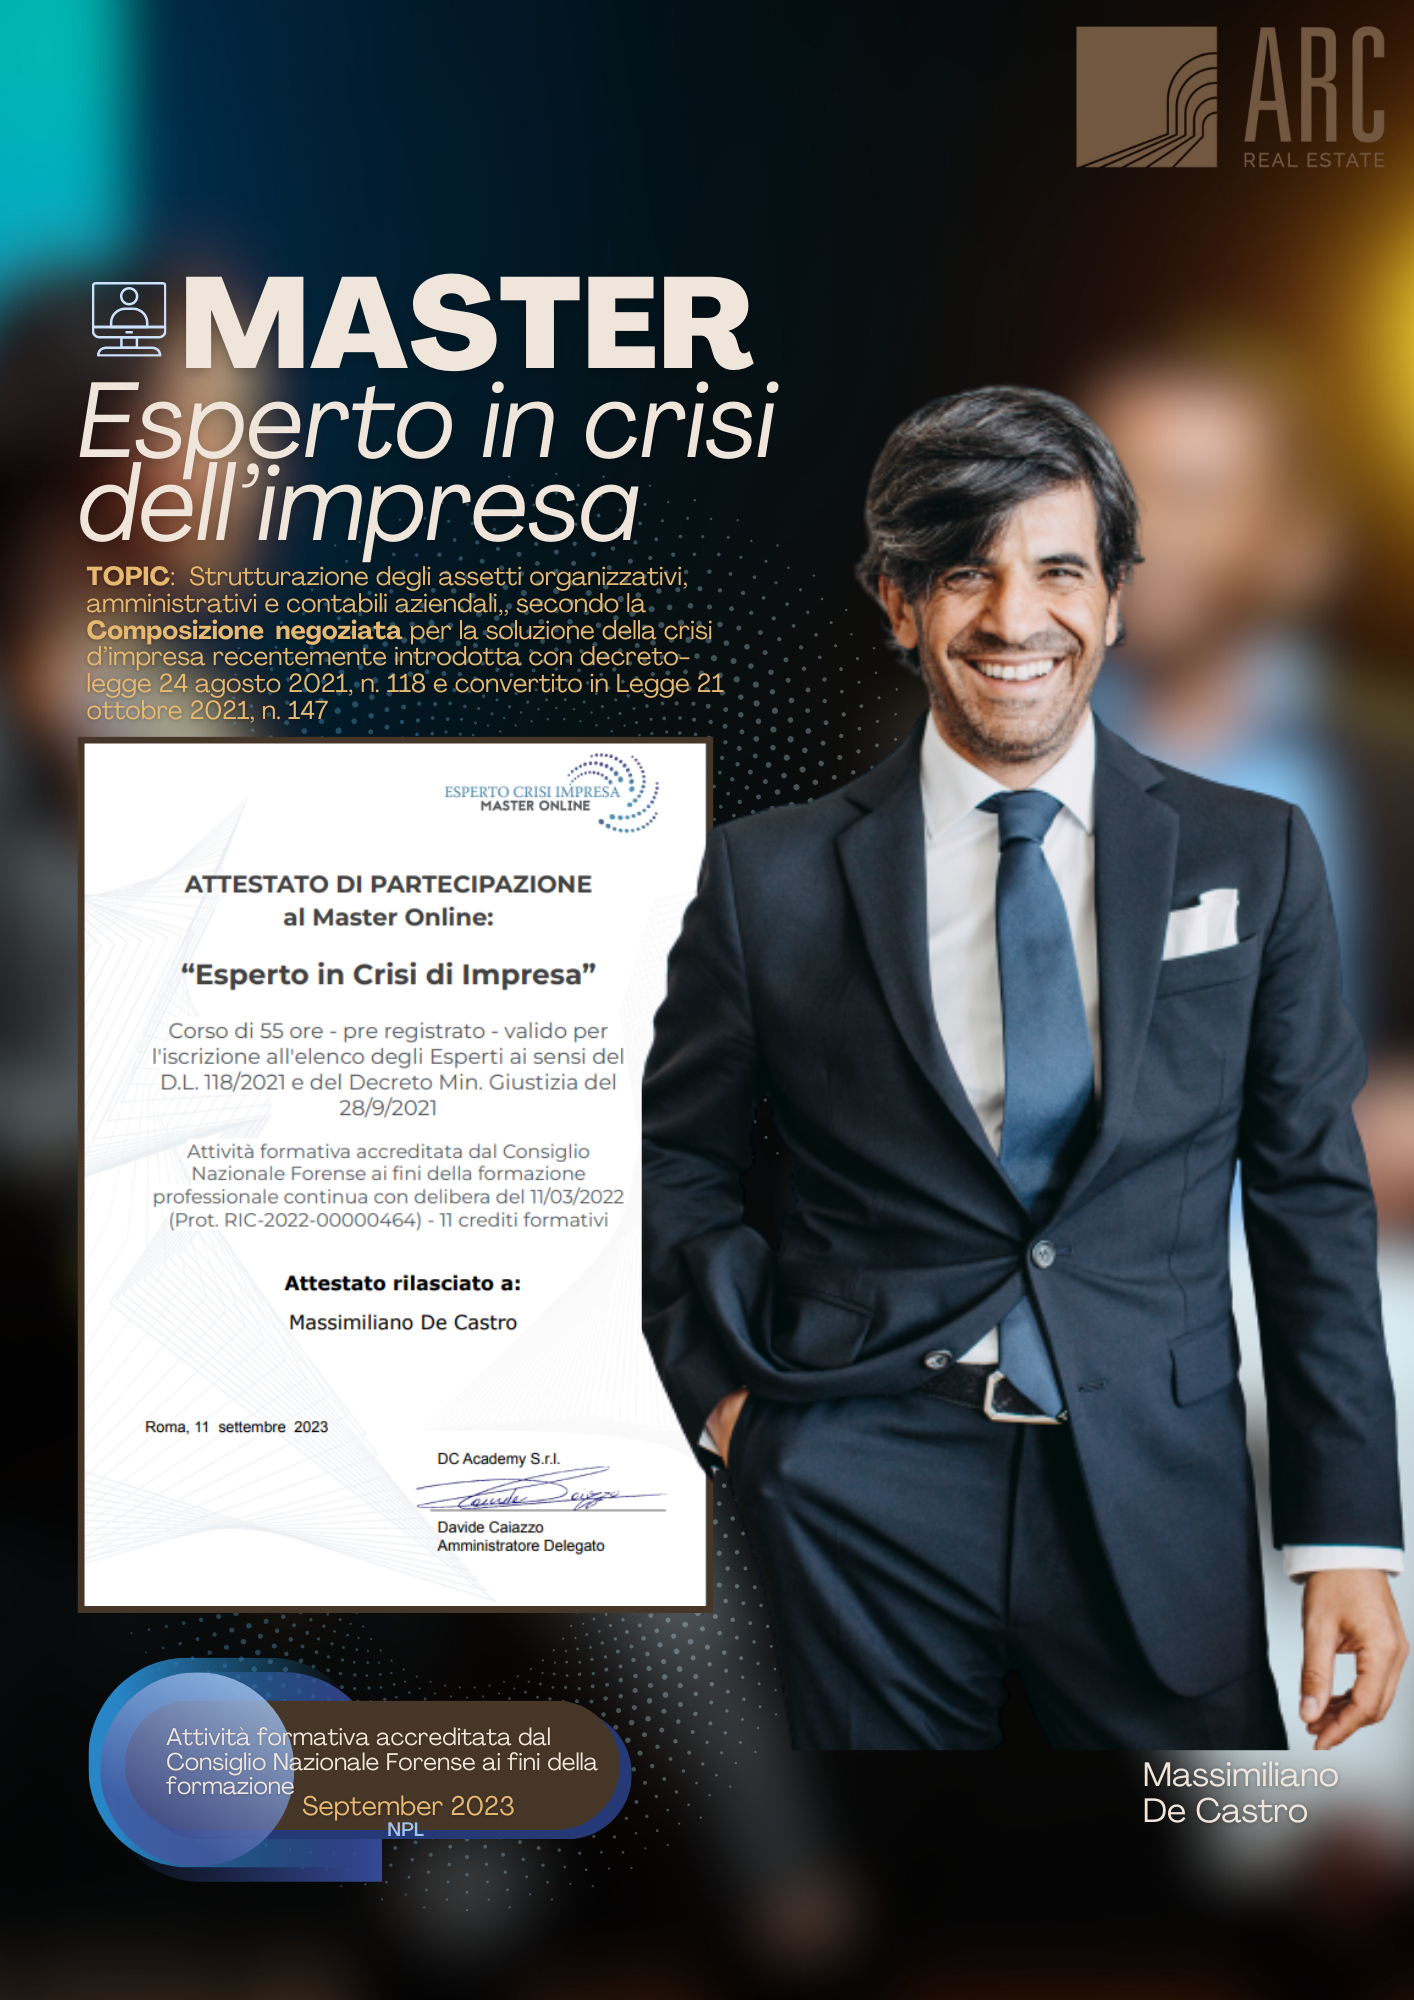 A Master in "Expert in Business Crisis" for our chairman Massimiliano De Castro   